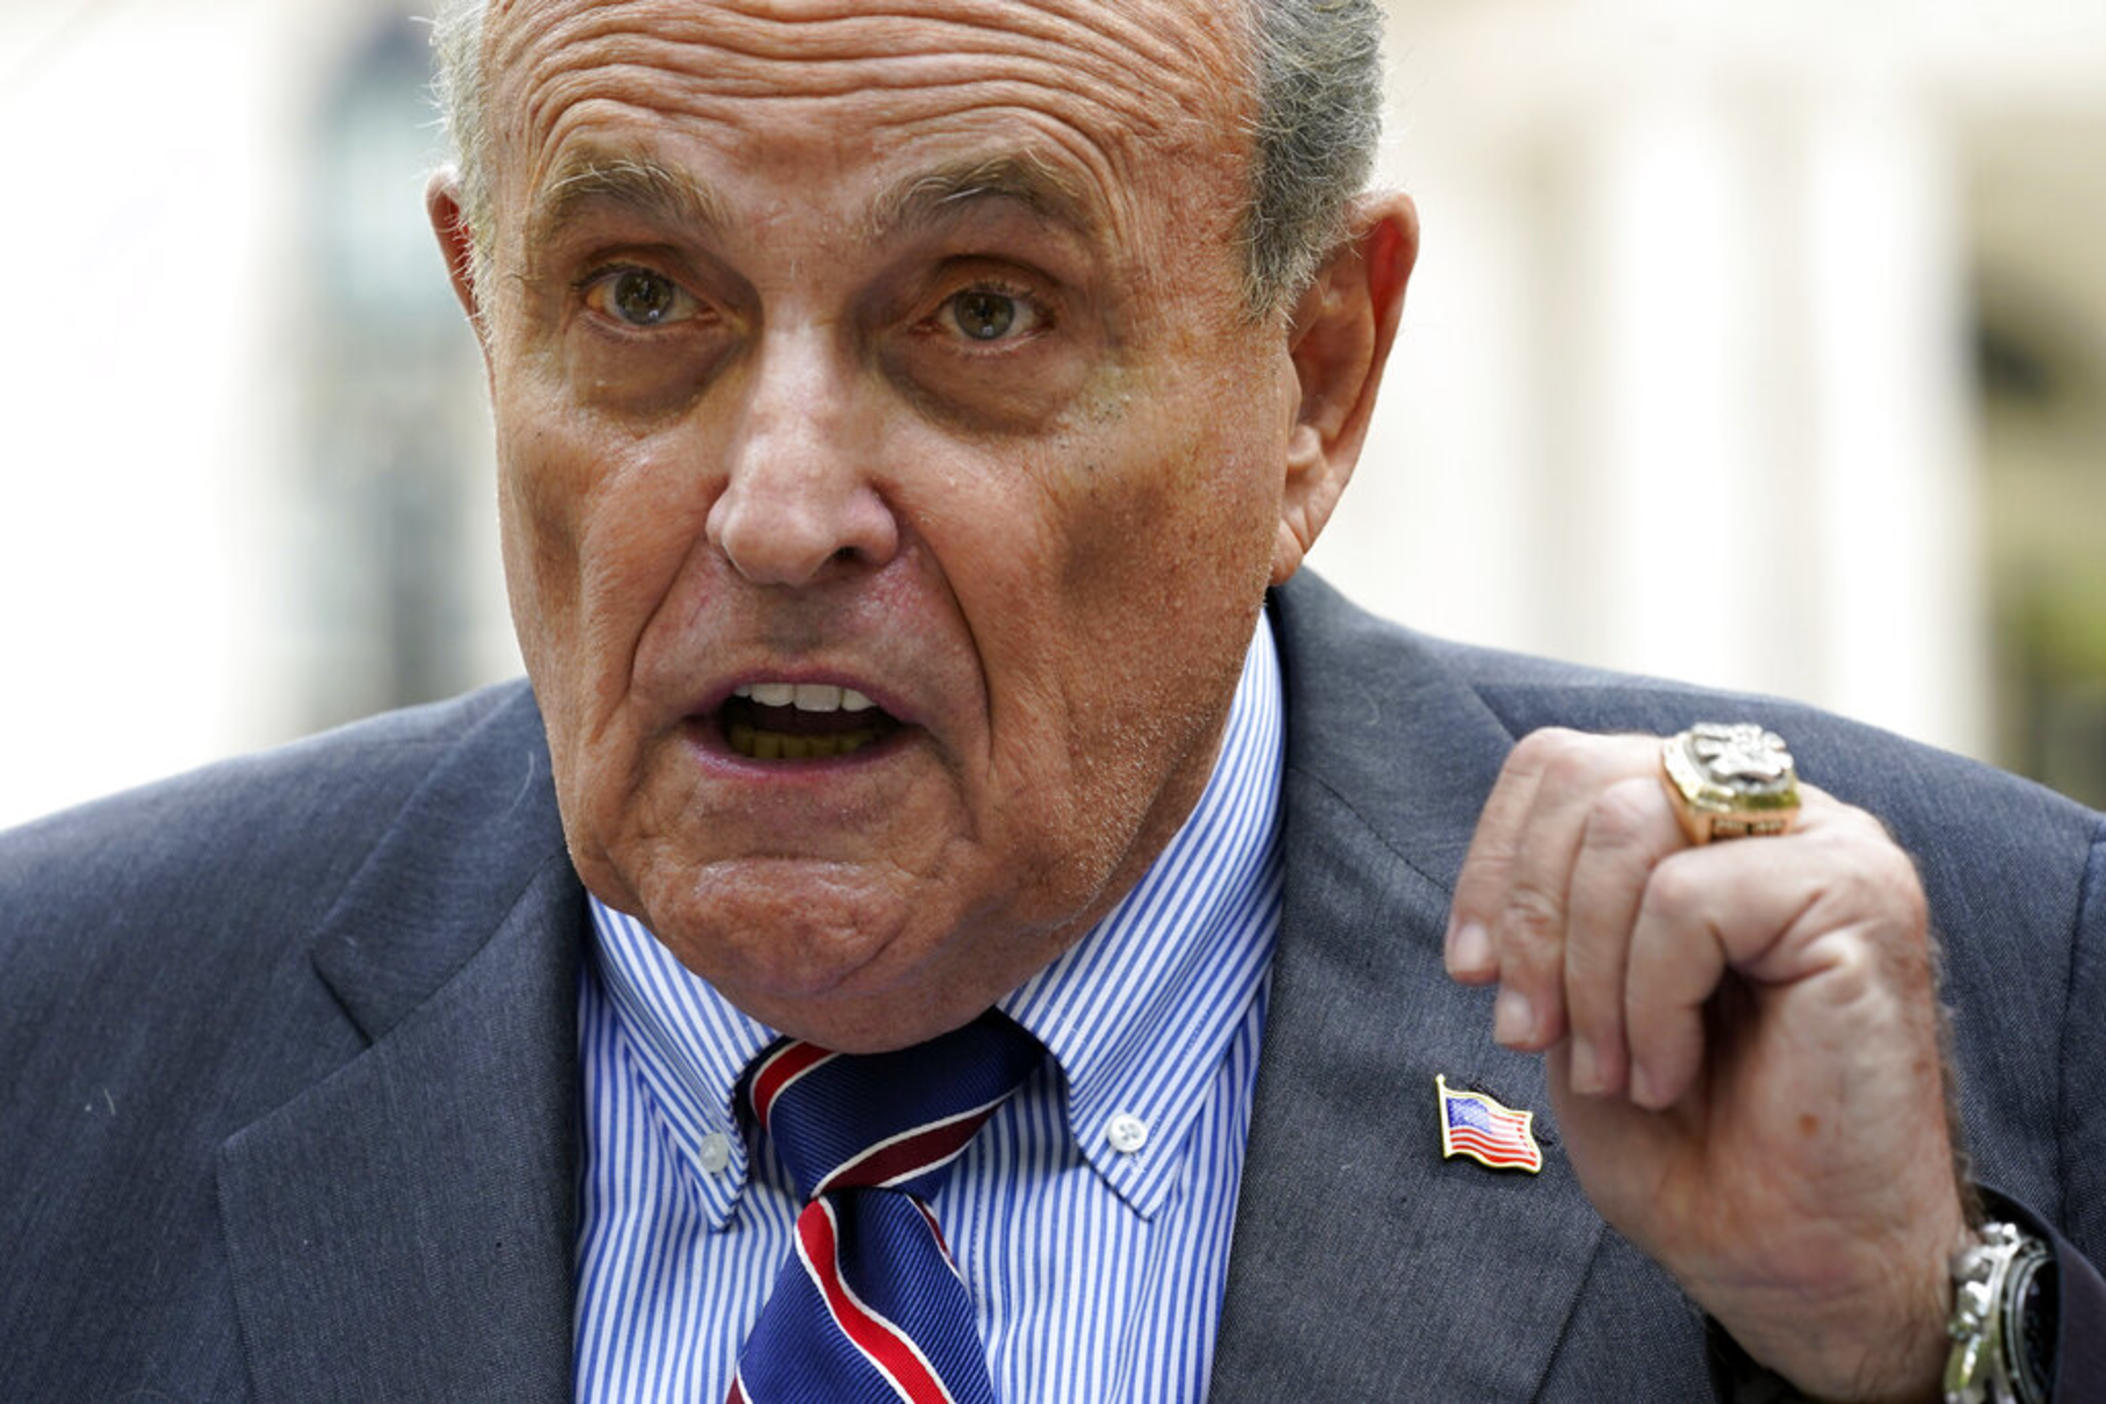 Former New York City Mayor Rudy Giuliani speaks during a news conference June 7, 2022, in New York. The Georgia investigation into potential criminal interference in the 2020 election is heating up. Prosecutors are trying to force allies and advisers of former President Donald Trump to come to Atlanta to testify before a special grand jury.